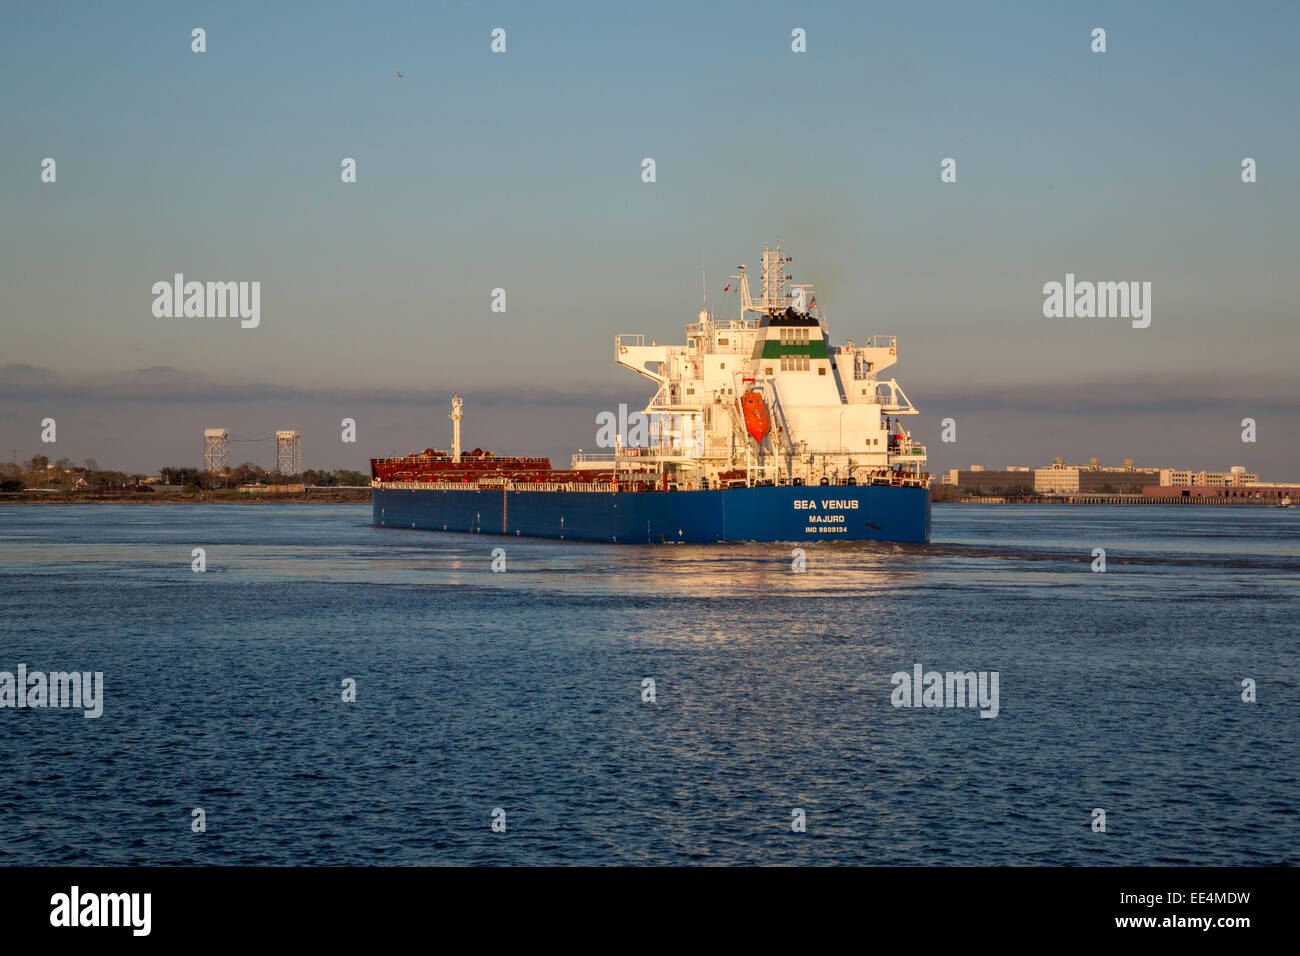 New Orleans, Louisiana.  The Sea Venus, a Bulk Carrier, on the Mississippi River. Stock Photo